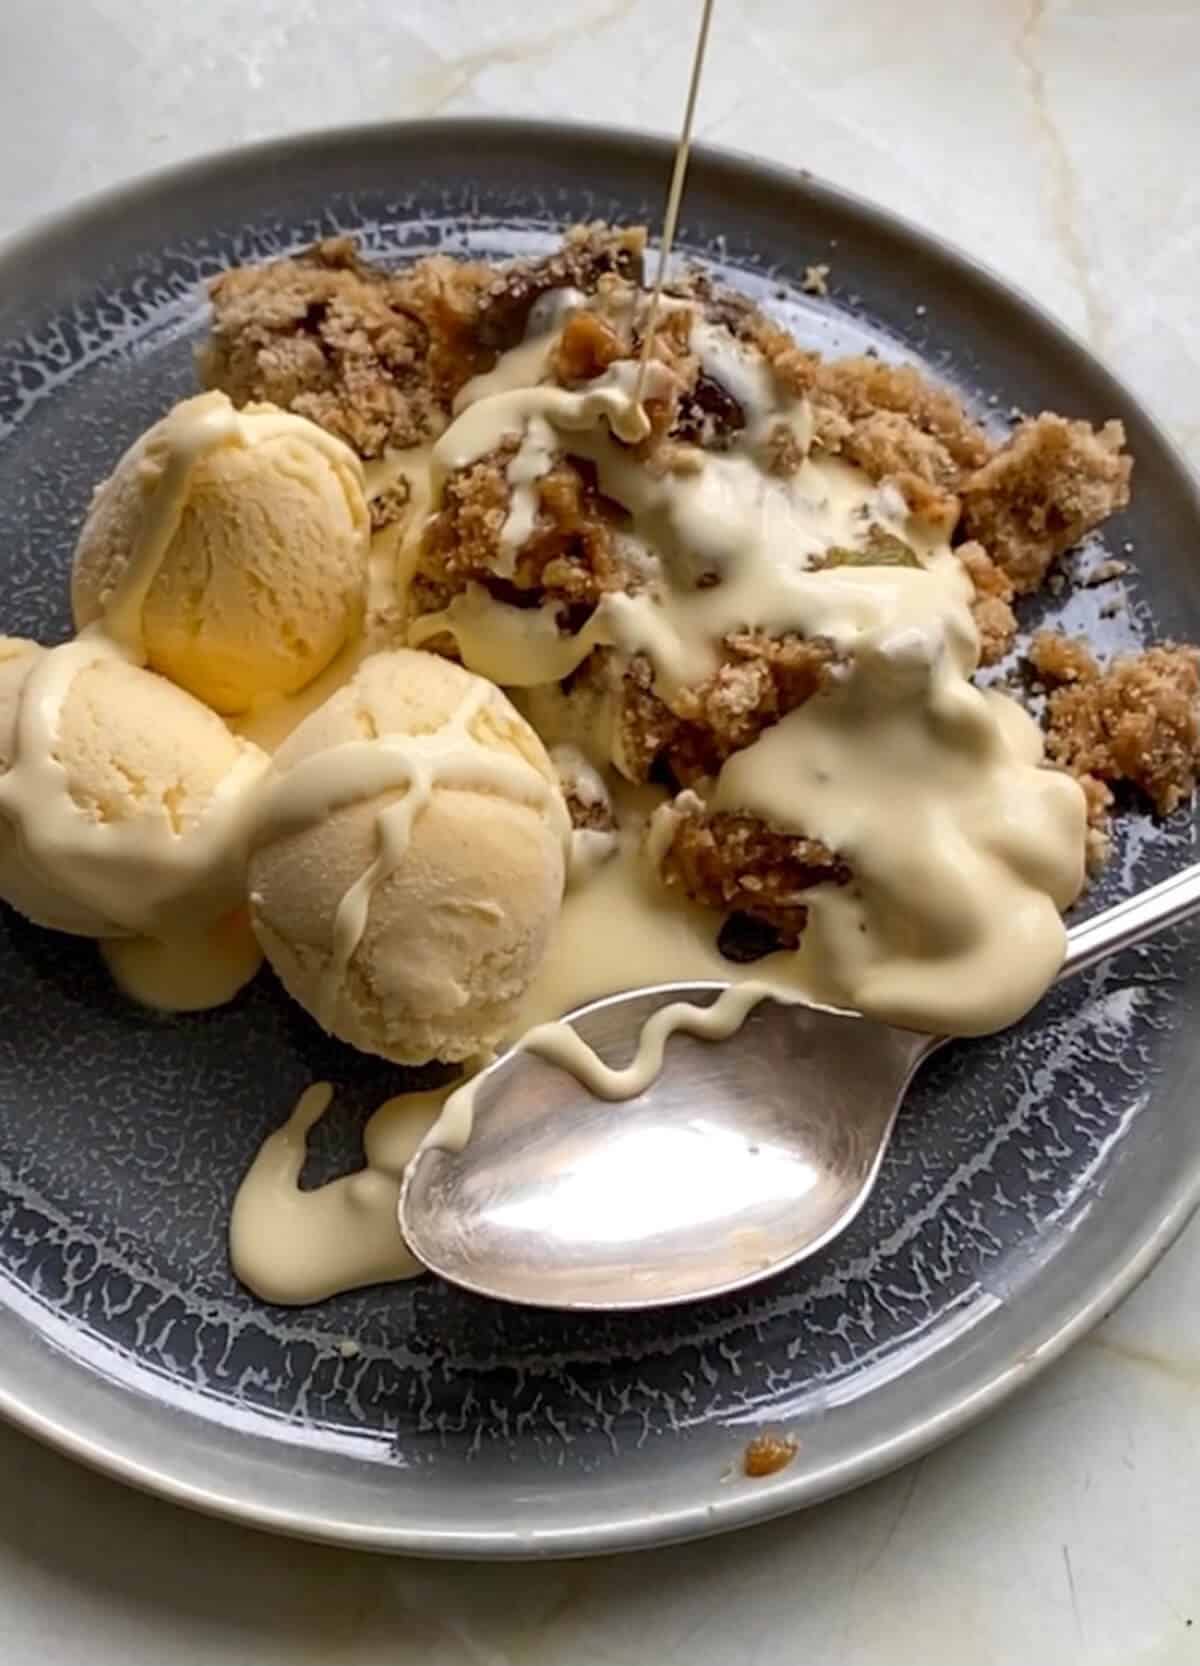 greengage and hazelnut crumble with scoops of vanilla ice cream and cream poured on top